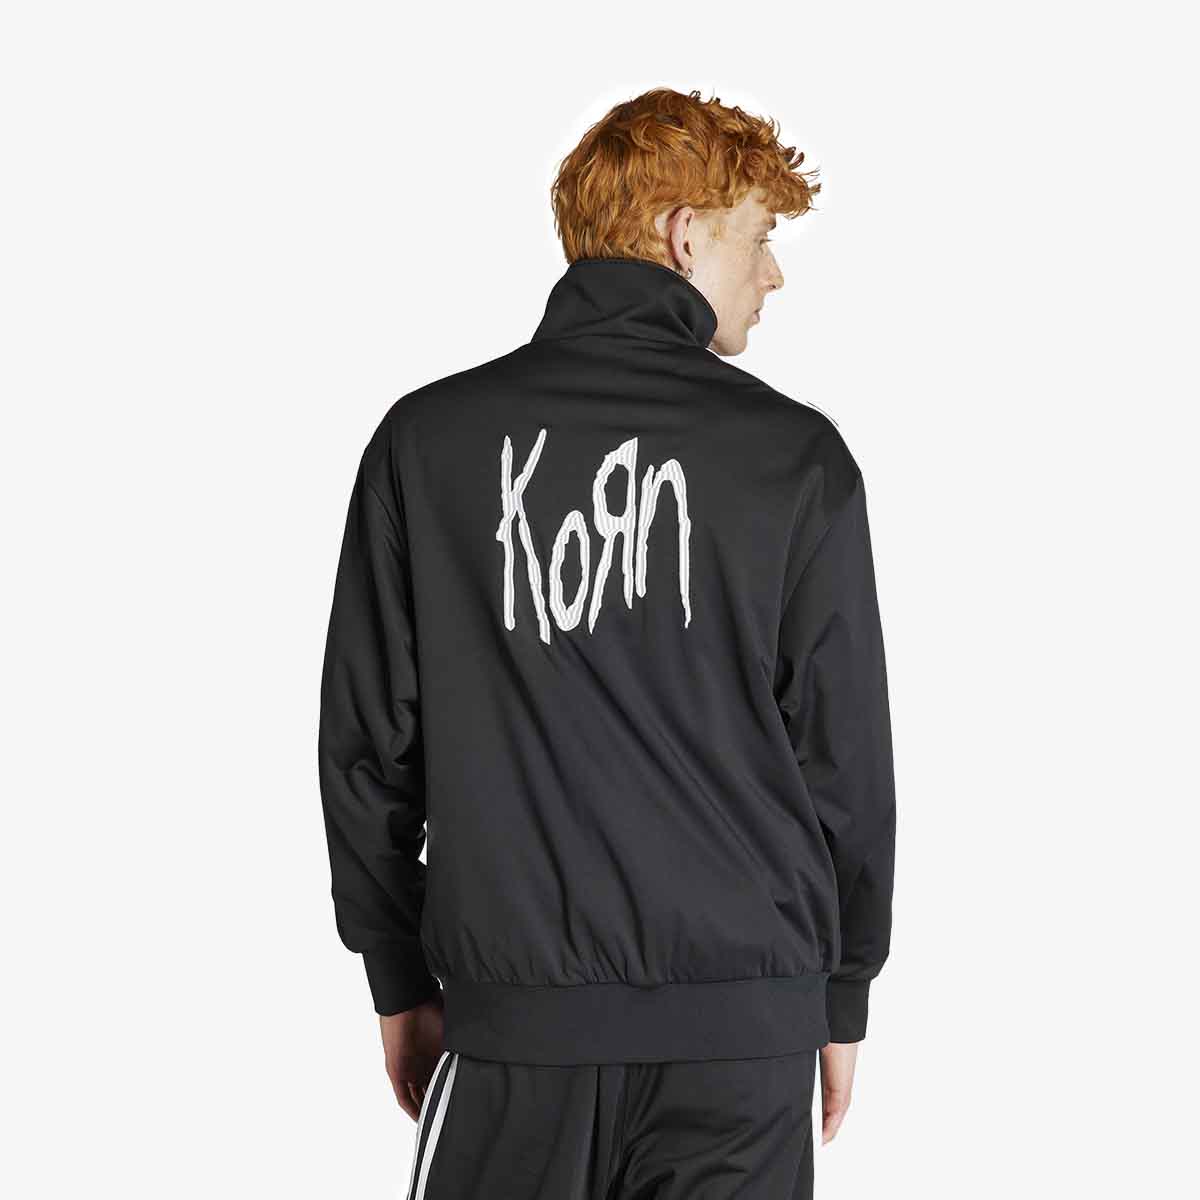 Adidas x KORN Track Top (Black) | END. Launches